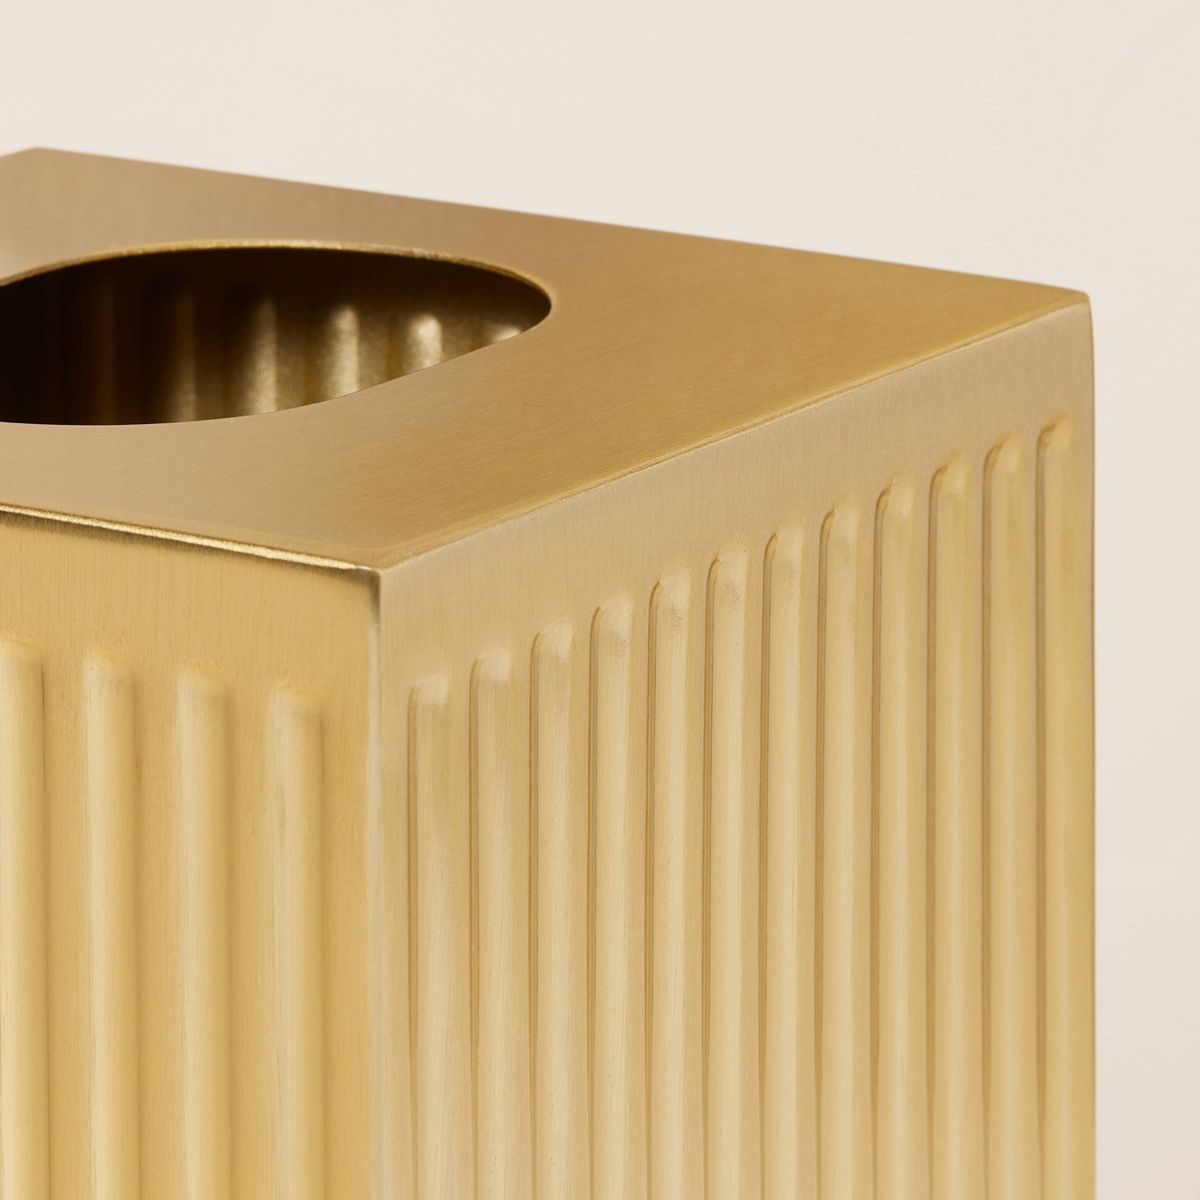 Fluted Brass Bathroom Tissue Box Cover Antique Finish - Hearth & Hand™ with Magnolia | Target